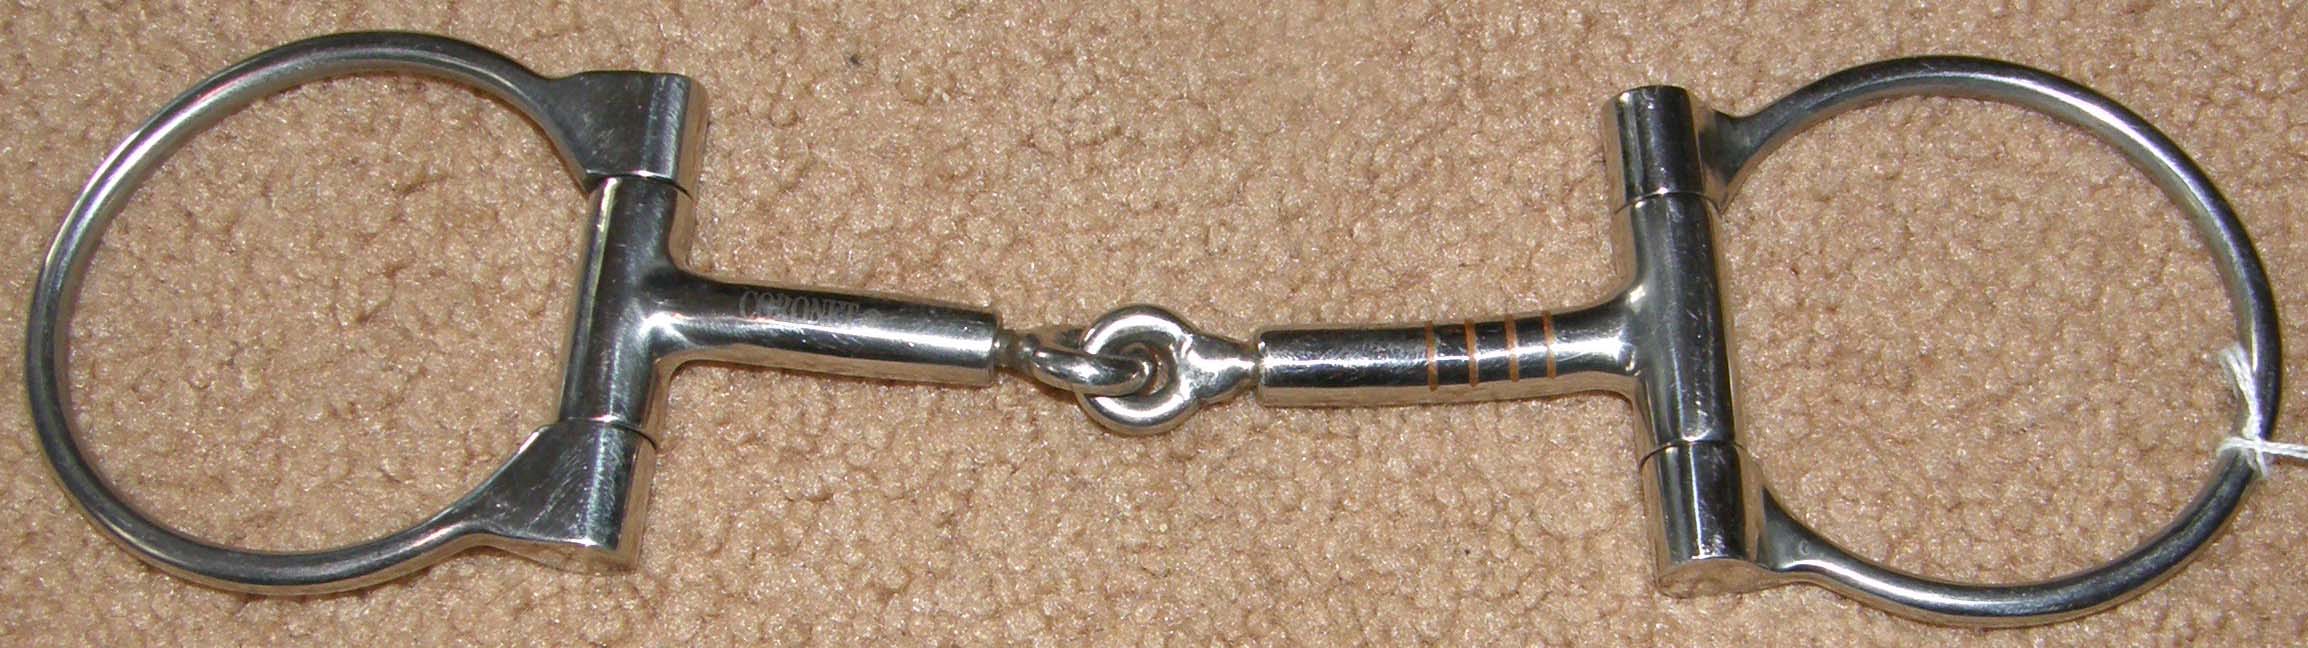 Coronet Robart Pinchless 4 1/2” Jointed Snaffle Off Set Dee Bit Offset D Snaffle Bit Copper Inlay Western Snaffle Bit Futurity Snaffle